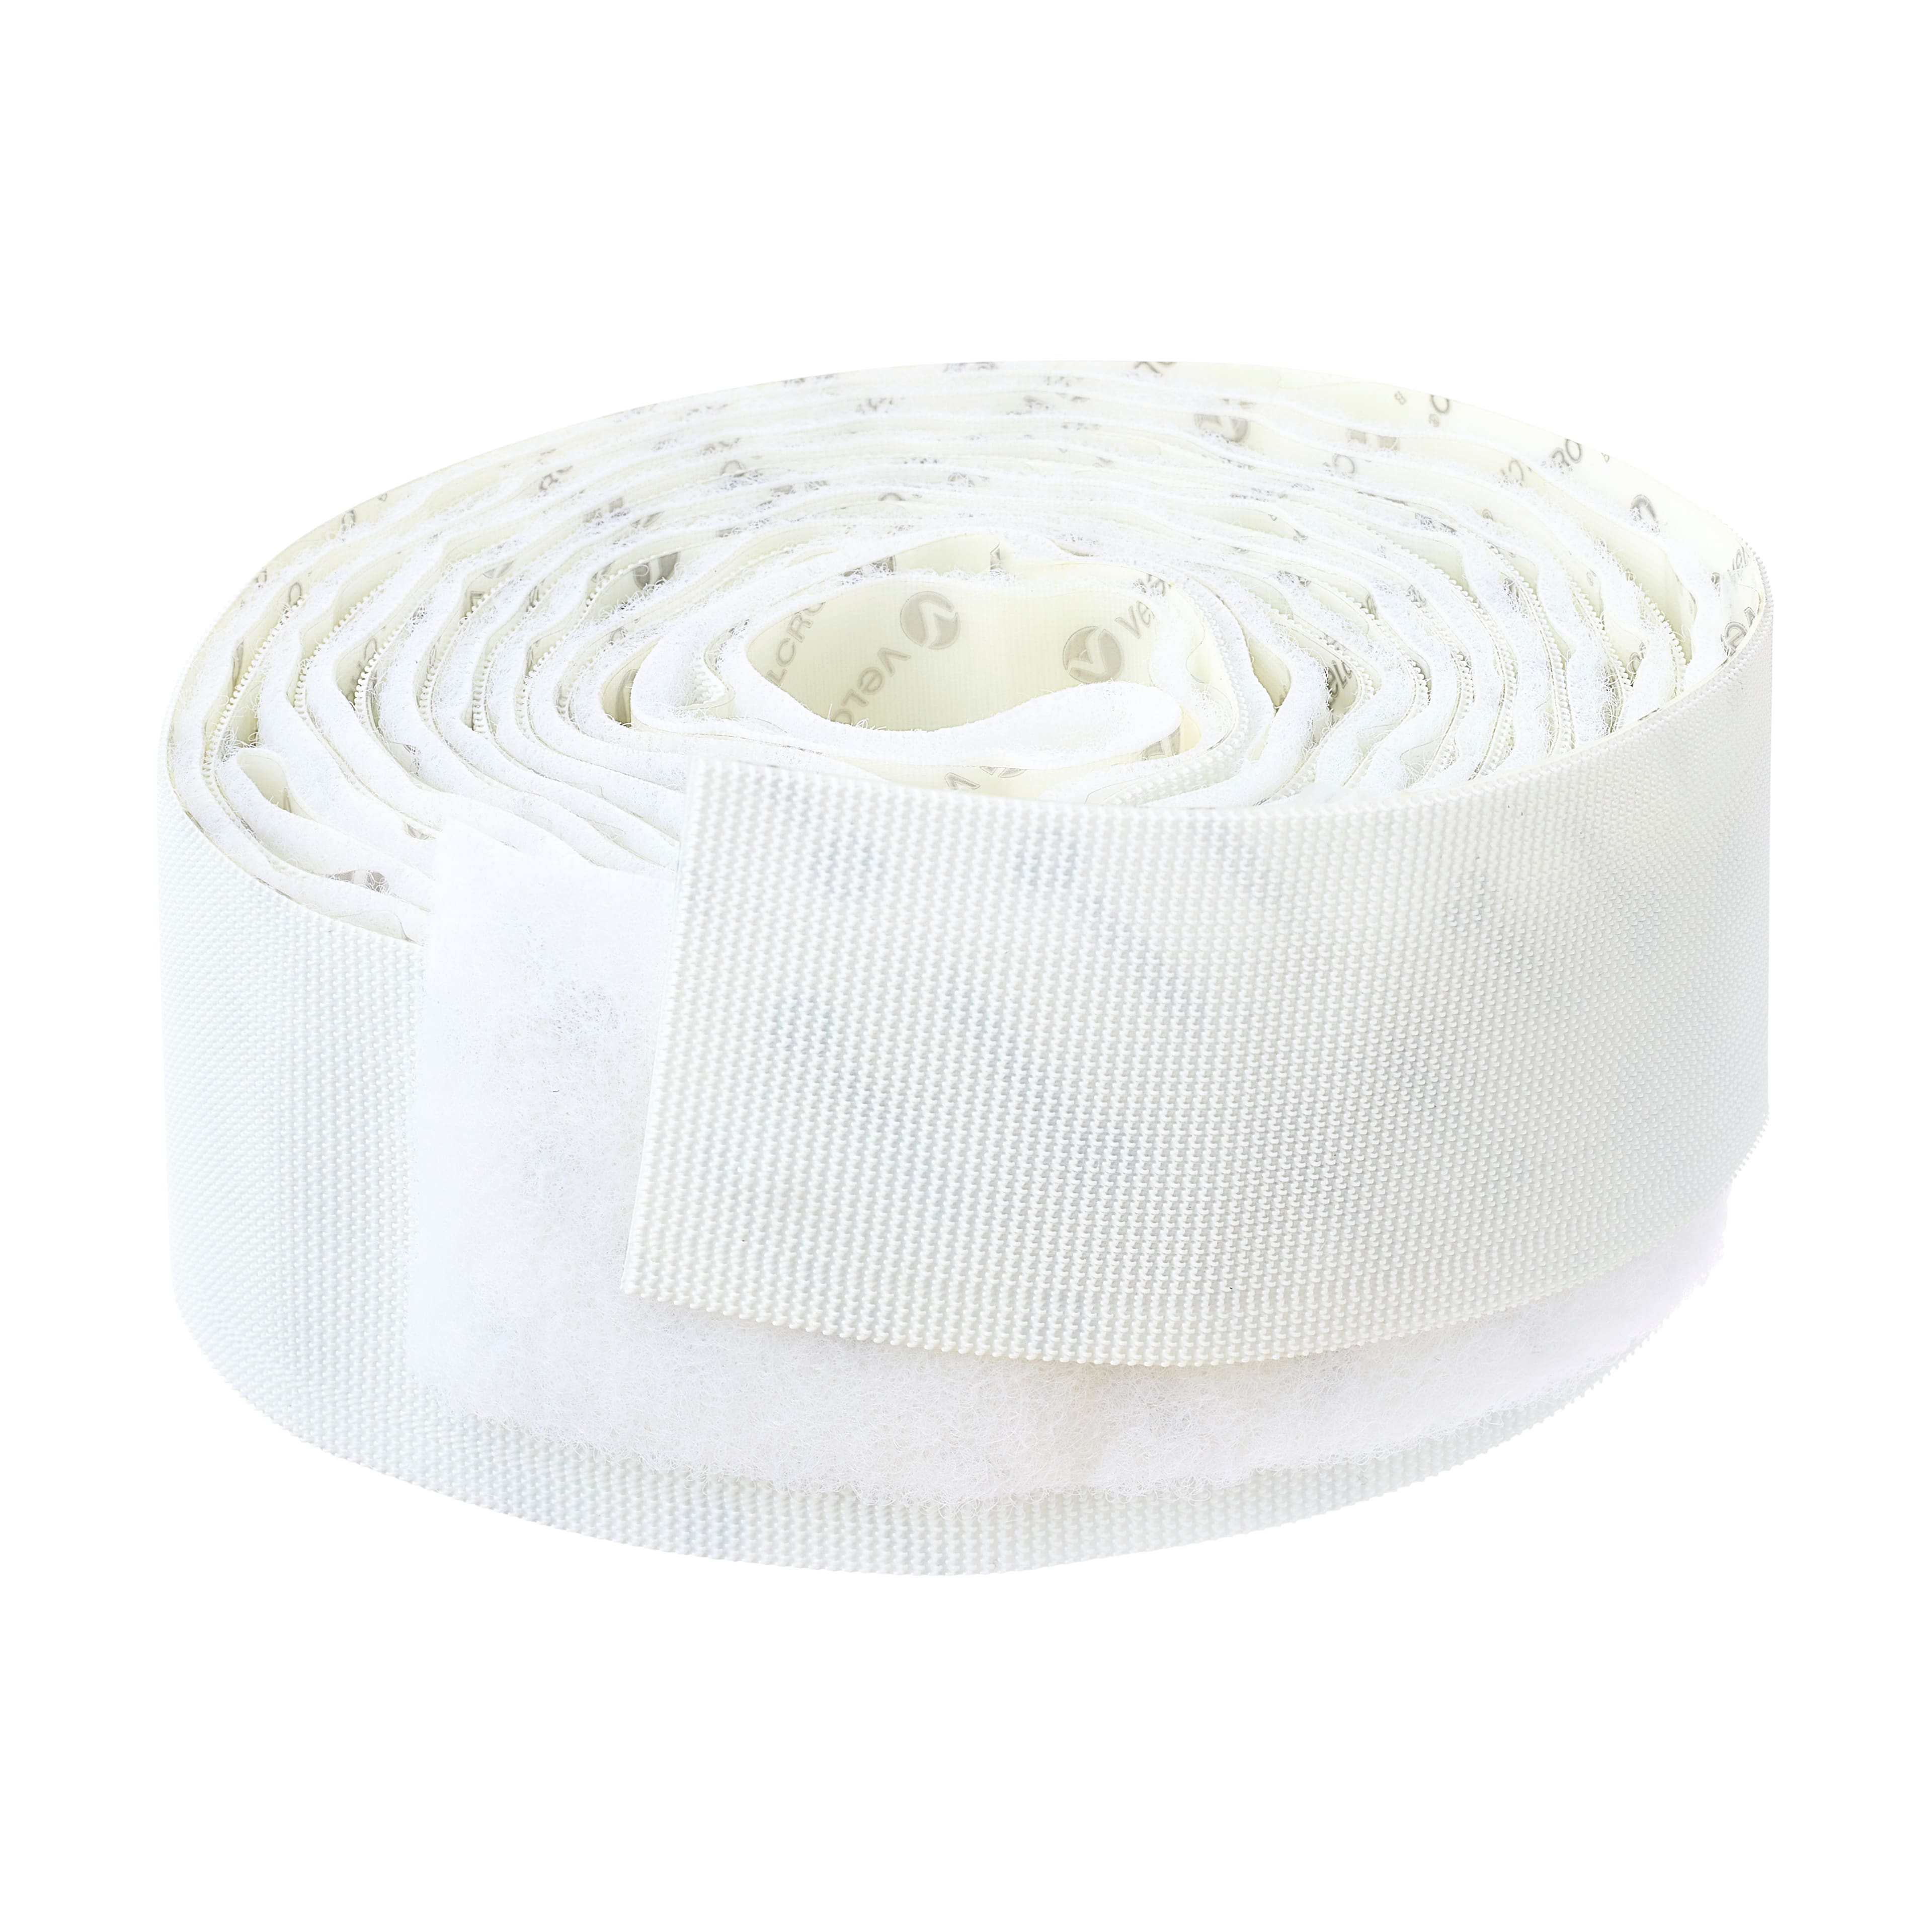 VELCRO Brand Heavy Duty Tape | 12 Foot Roll | Strong Sticky Back Adhesive  Holds up to 10 lbs | Industrial Strength Fasteners for Indoor or Outdoor  Use